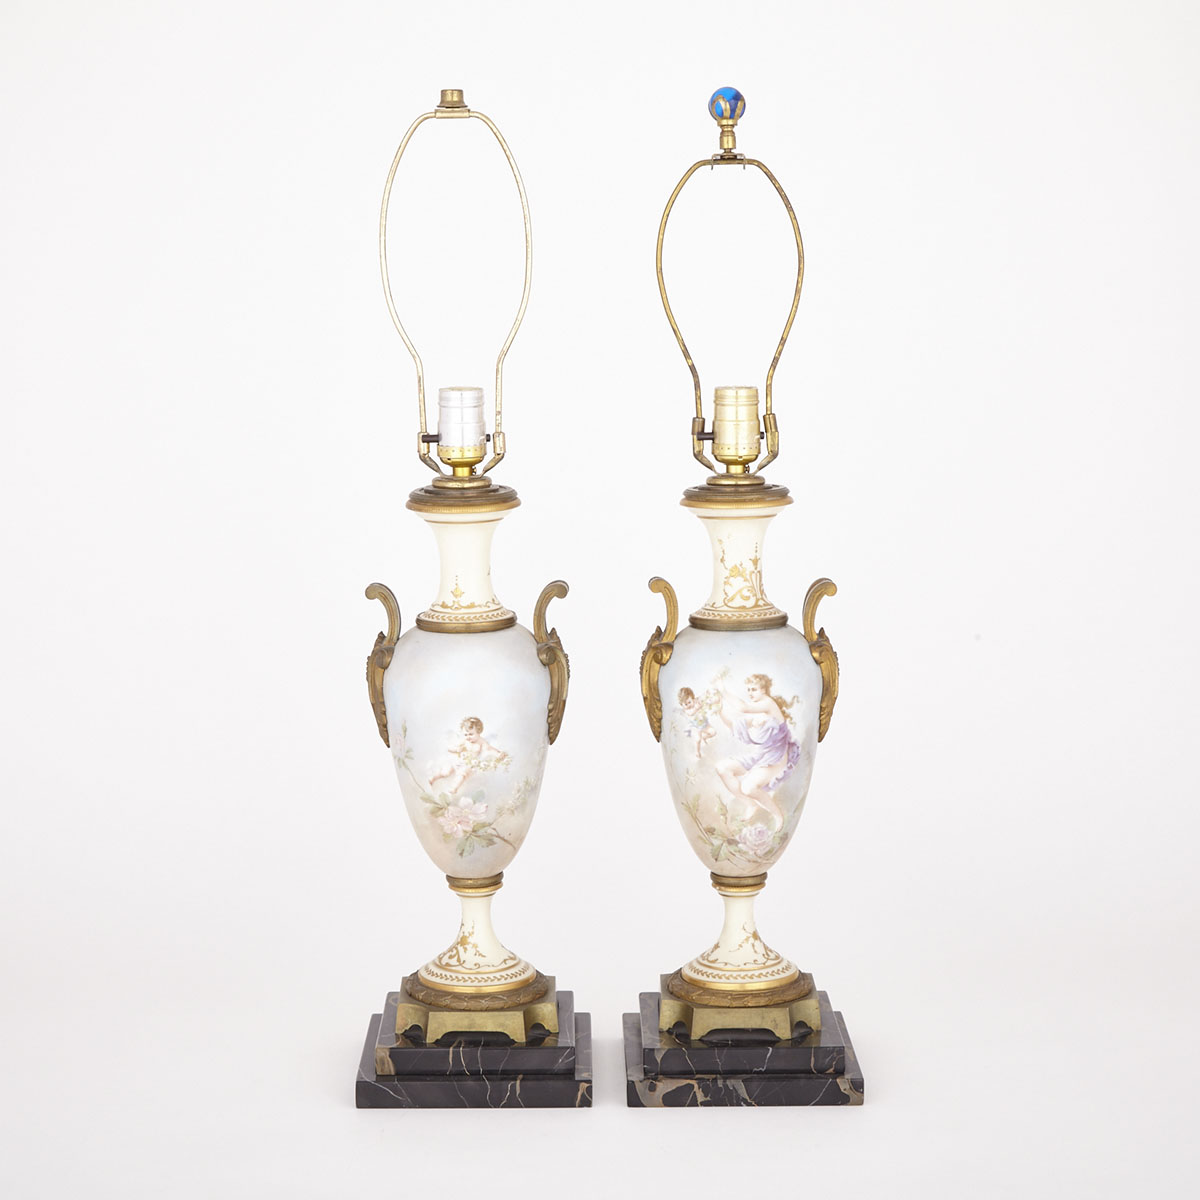 Pair of French Ormolu Mounted Sèvres-Style Porcelain Table Lamps, early 20th century